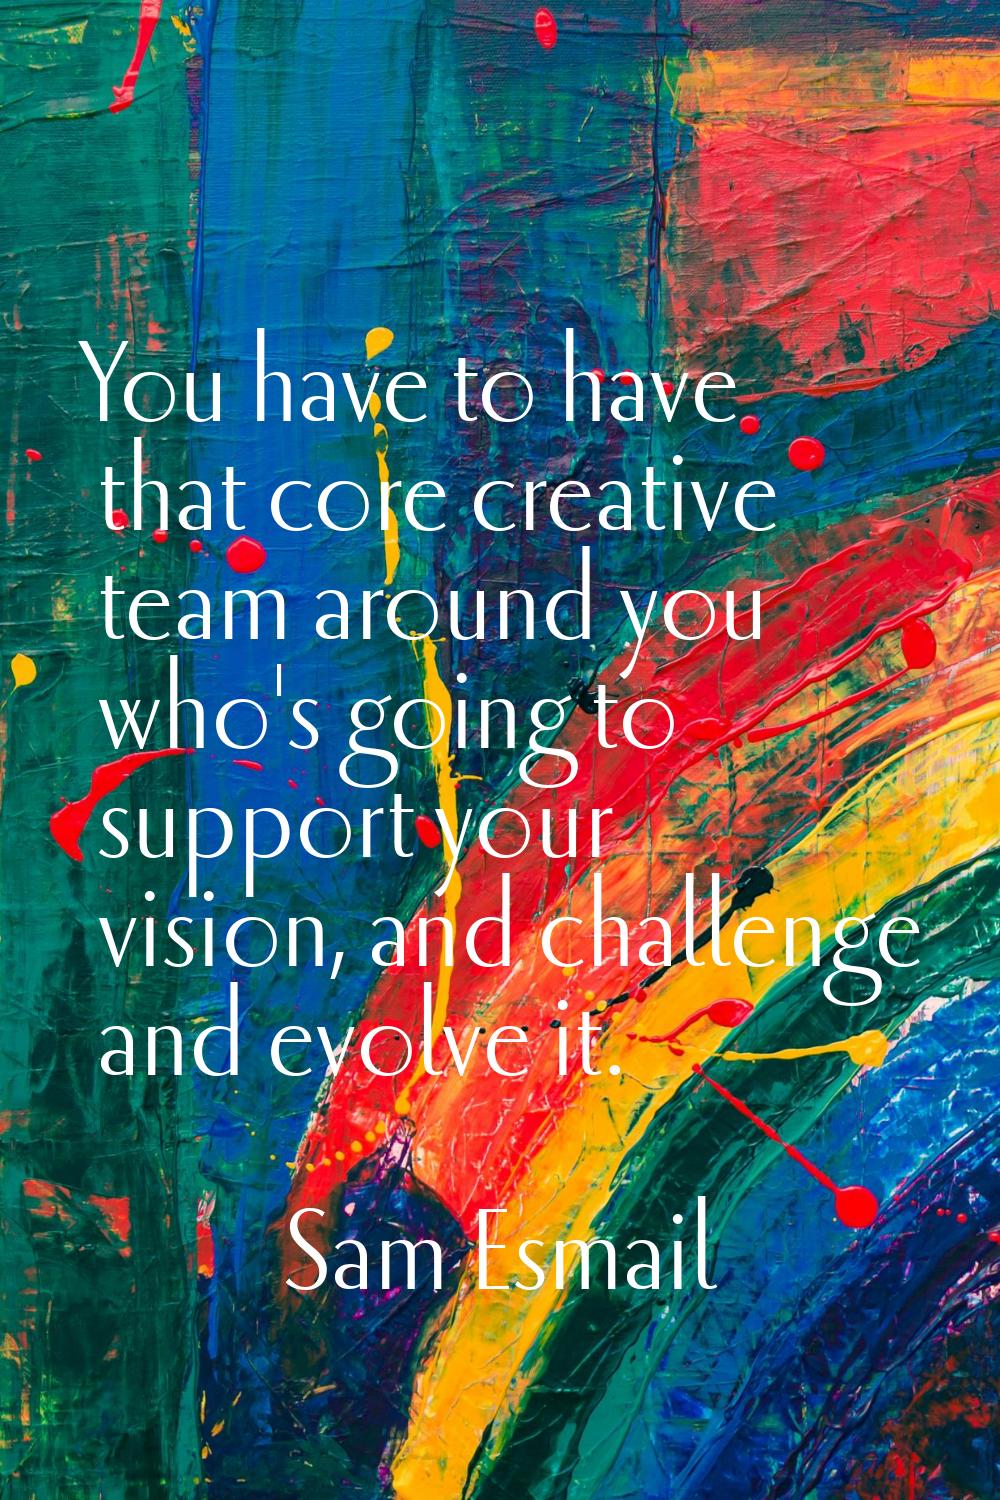 You have to have that core creative team around you who's going to support your vision, and challen